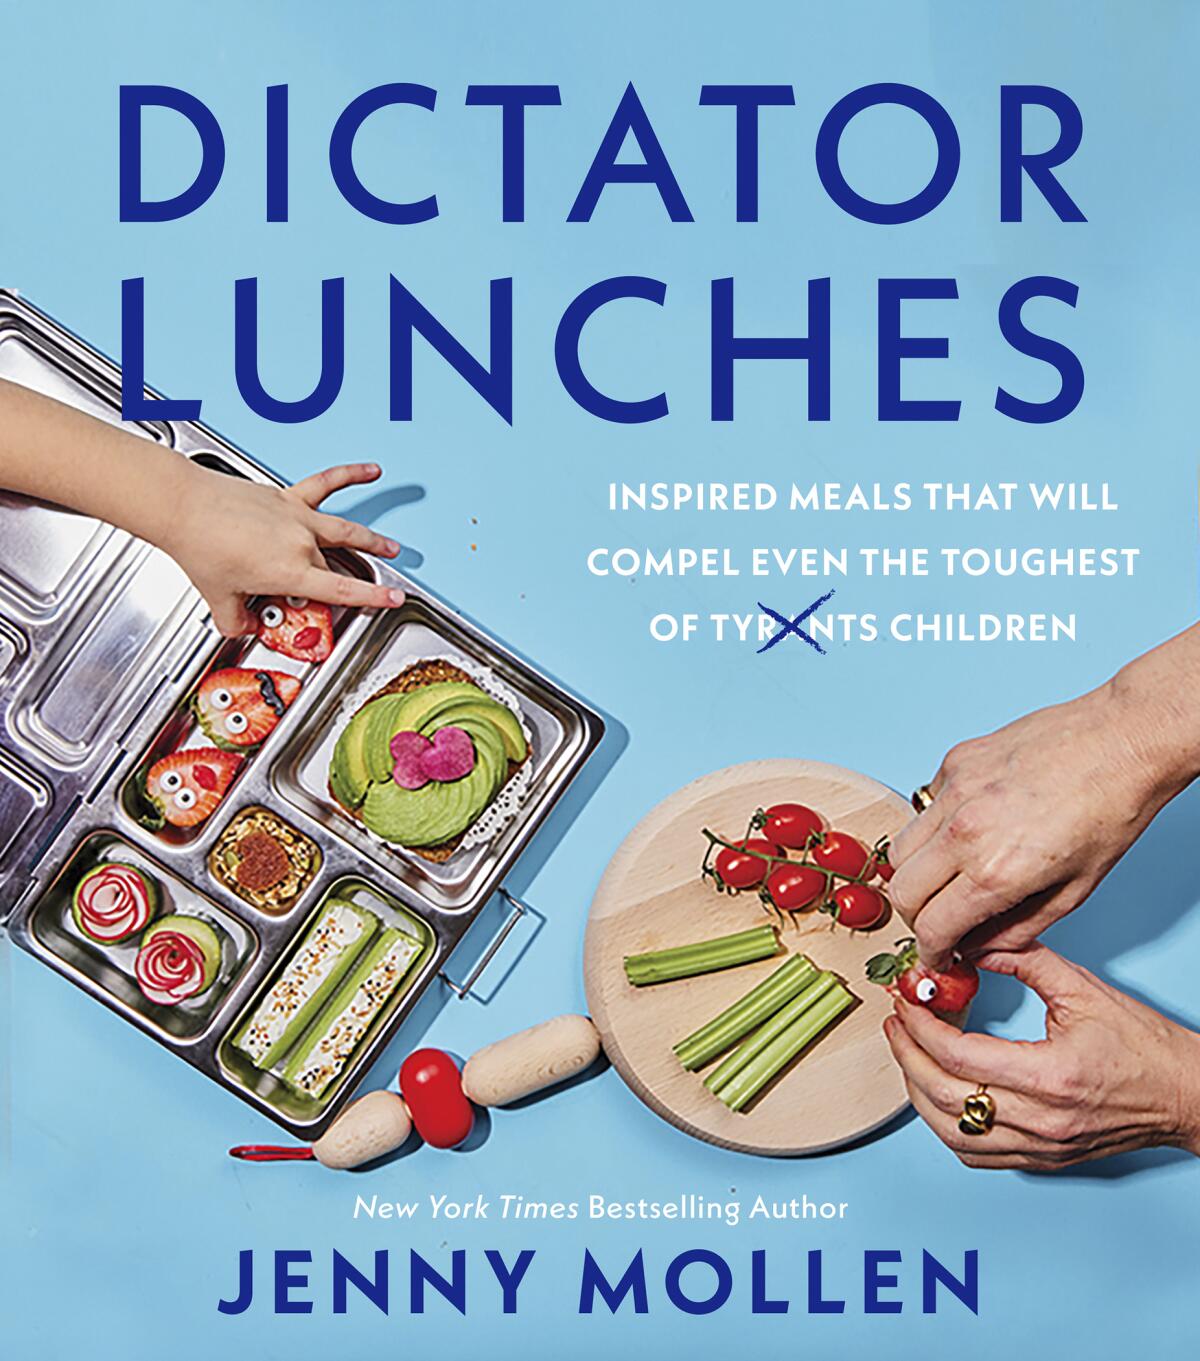 This cover image released by Harvest shows "Dictator Lunches: Inspired Meals That Will Compel Even the Toughest of Children" by Jenny Mollen. (Harvest via AP)